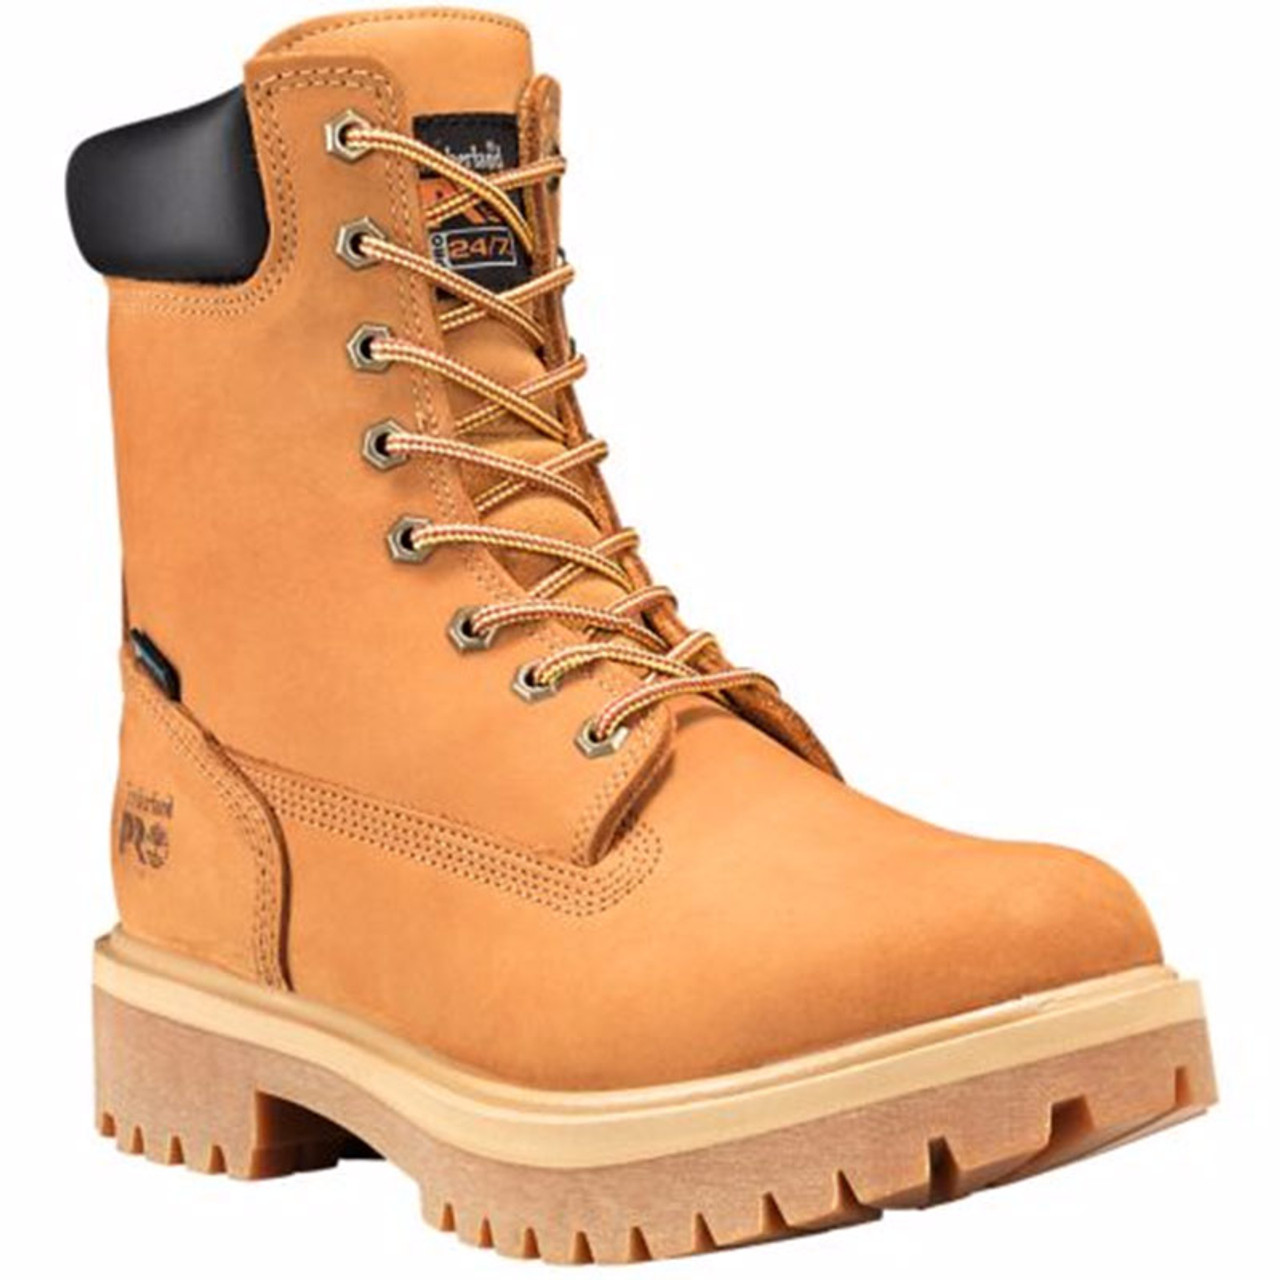 Timberland PRO 26002 DIRECT ATTACH 400g Insulated Work Boots - Family Center